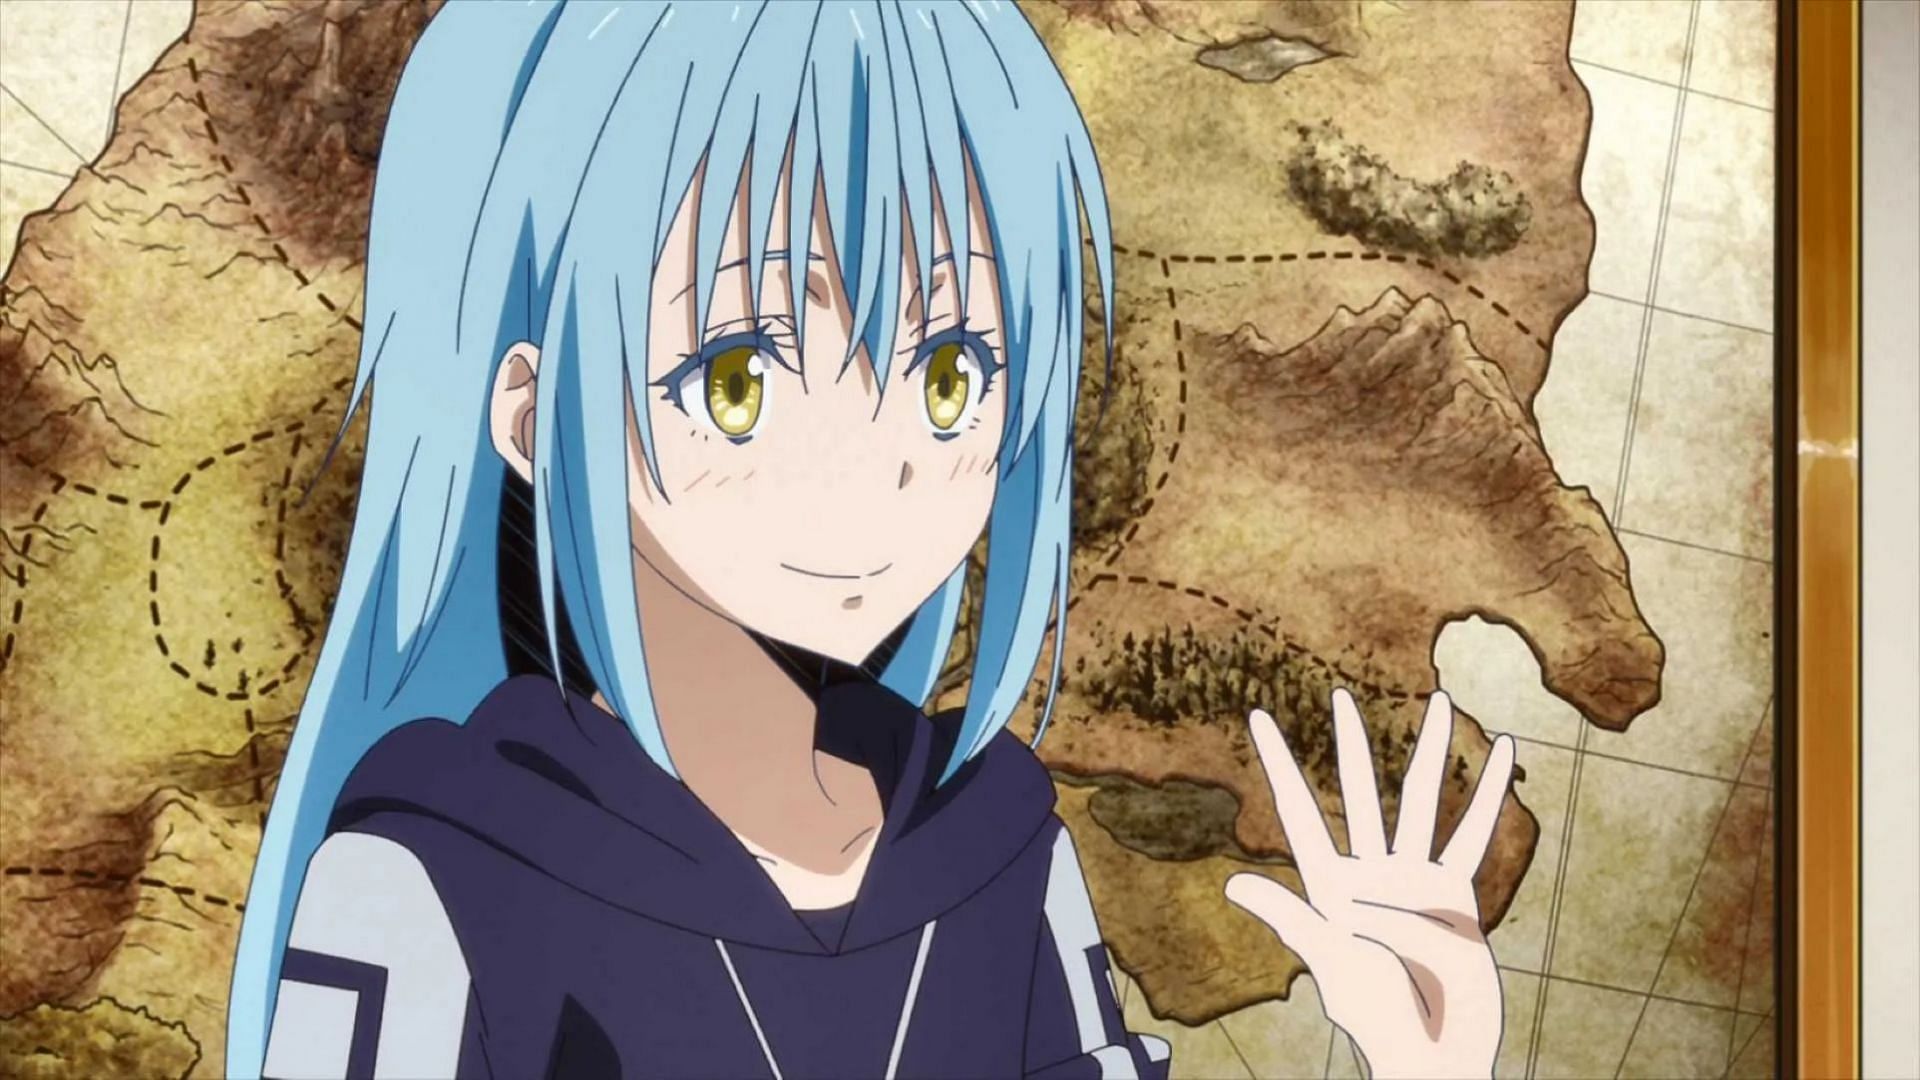 That Time I Got Reincarnated as a Slime: Anime where the main character is  reincarnated and overpowered (Explained)